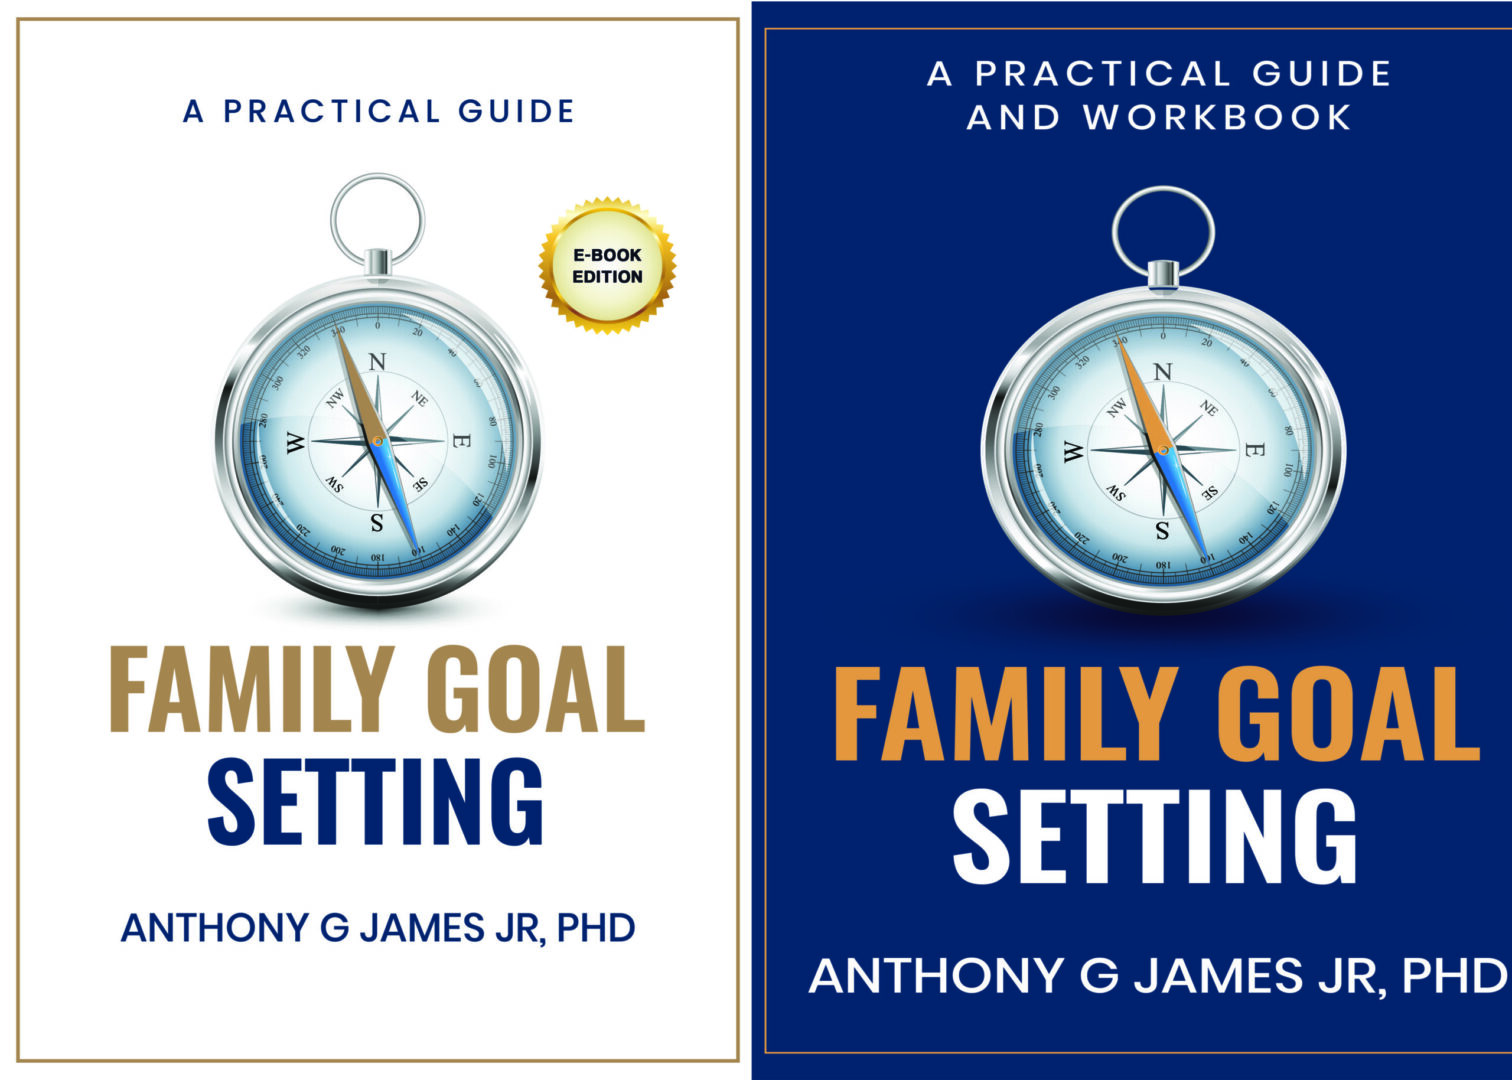 Family goal setting by anthony james and anthony james.